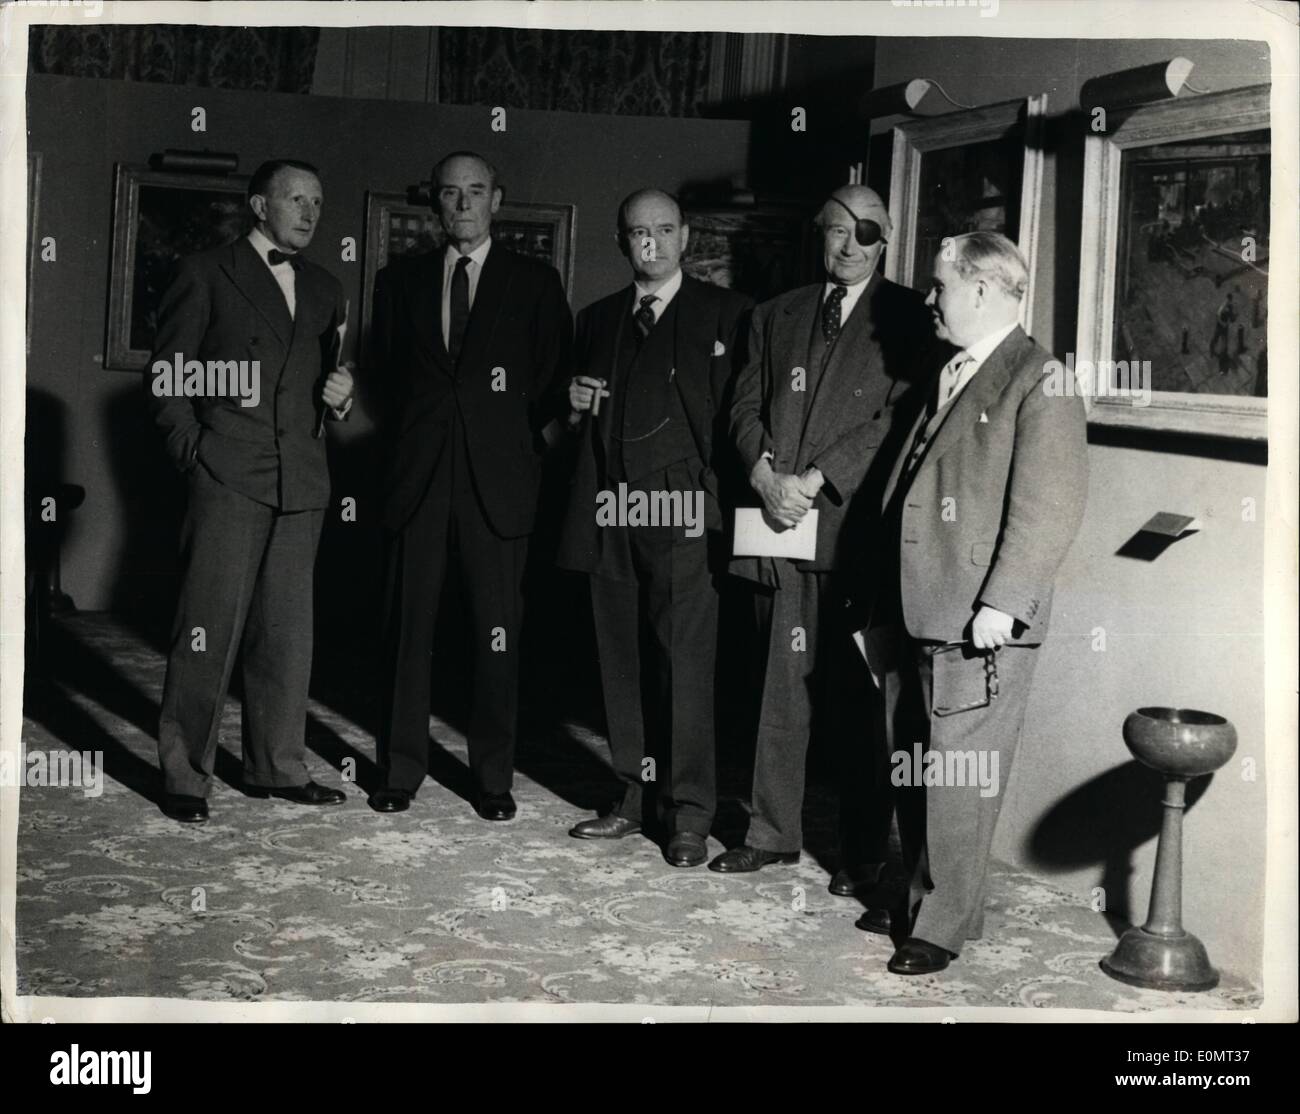 Jun. 06, 1956 - Private view of pictures of an Industry exibition: Pictures of an Industry an Exhibition of paintings by Terence Cuneo, commissioned by the Inco-Mond Nickel Group of Companies, opens today at Grosvenor House. Photo shows (L to R) the Rt. Hon. Viscount Margesson, Mr. Henry S. Wingate, of New york, Mr. Lewis Douglas, former U.S. Ambassador to Britain, and Mr. Lance H. Cooper, Chairman of the Mond Nickel Company Ltd. of Canada and Gt. Britain view some of the industrial paintings at yesterday's private view. Stock Photo